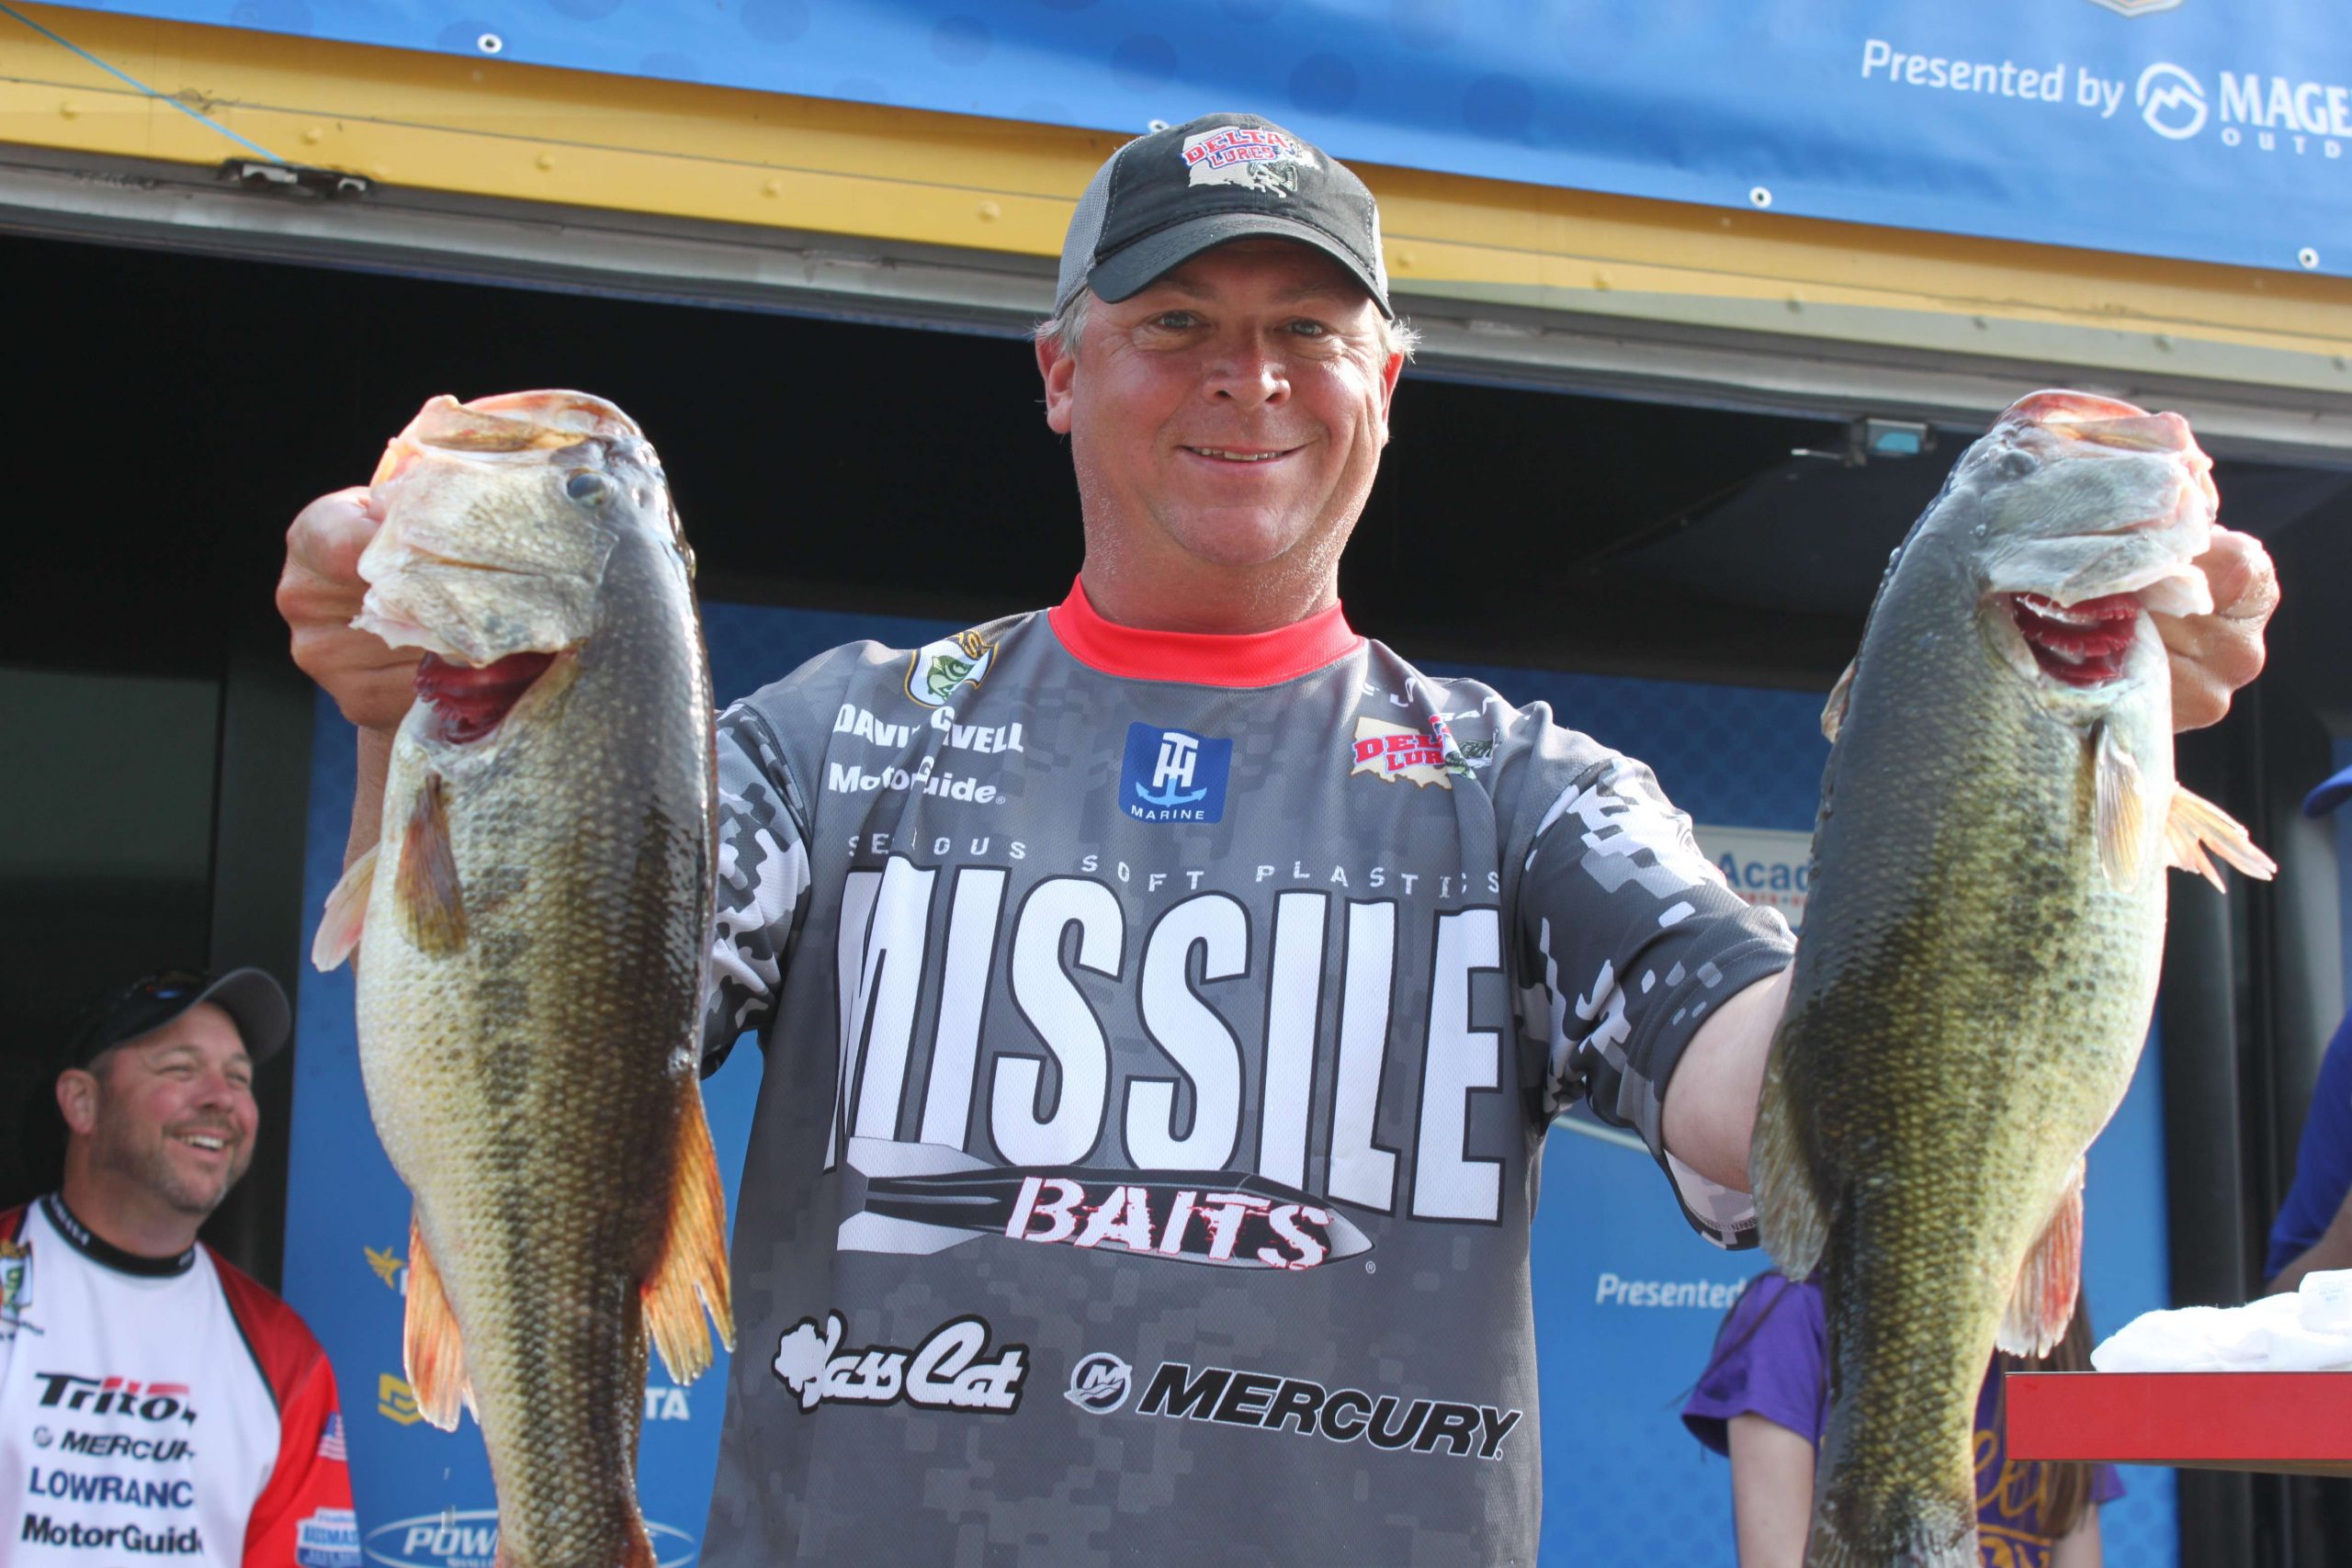 Thereâs David Cavell who placed sixth among boaters with 49-10. Cavell was the top angler from Team Louisiana, which won the team competition which was decided on Thursday.